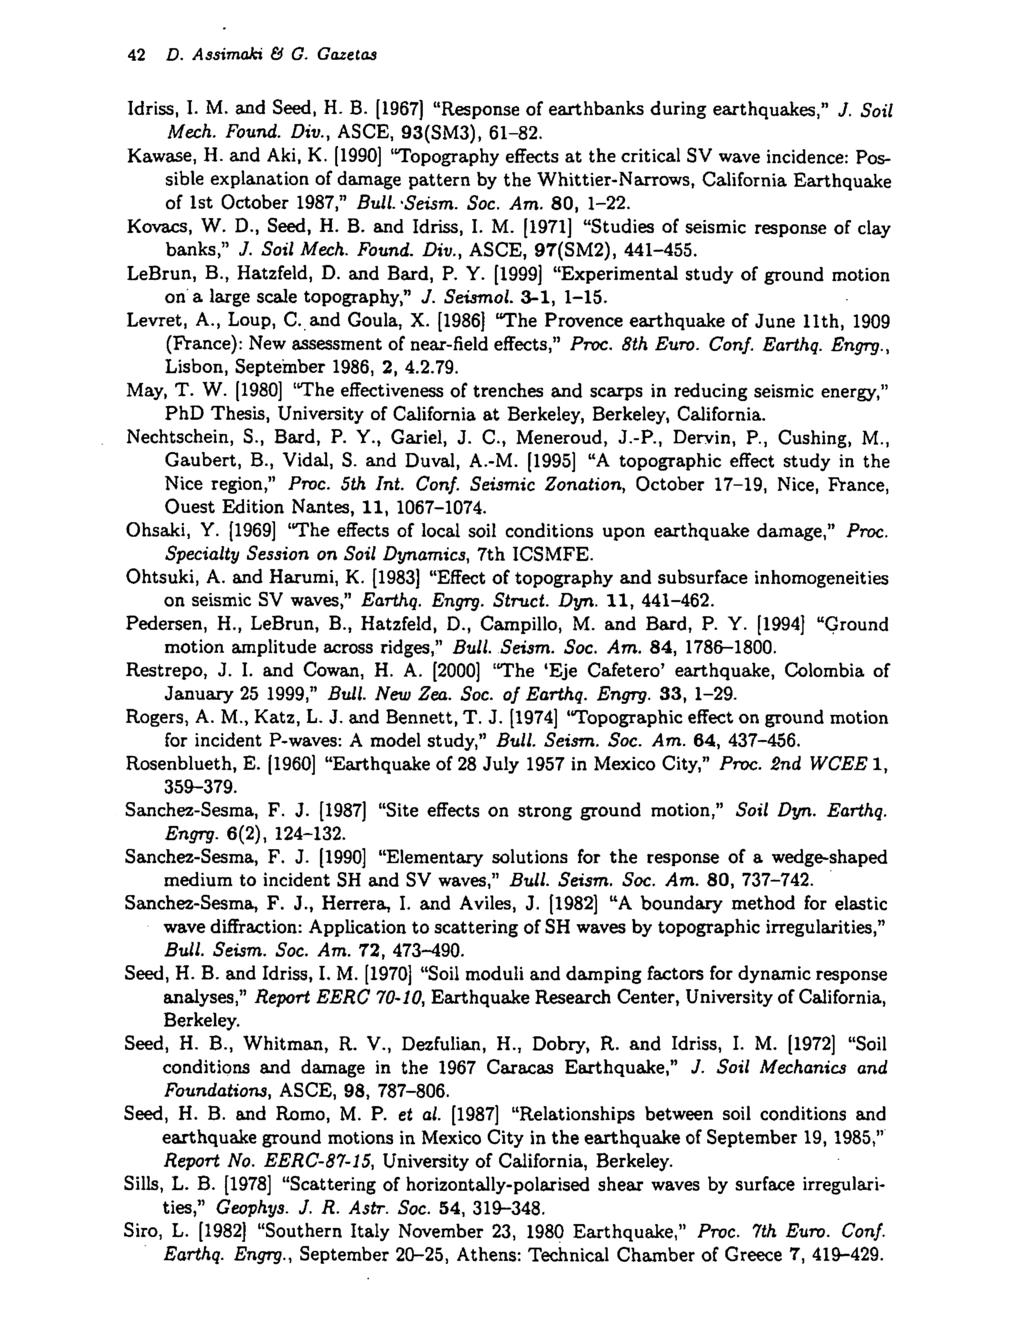 Idriss, 1. M. and Seed, H. B. (1967) "Response of earthbanks during earthquakw," J. Sail Meeh. Found. Div., ASCE, 93(SM3), 61-82. Kawase, H. and Aki, K.